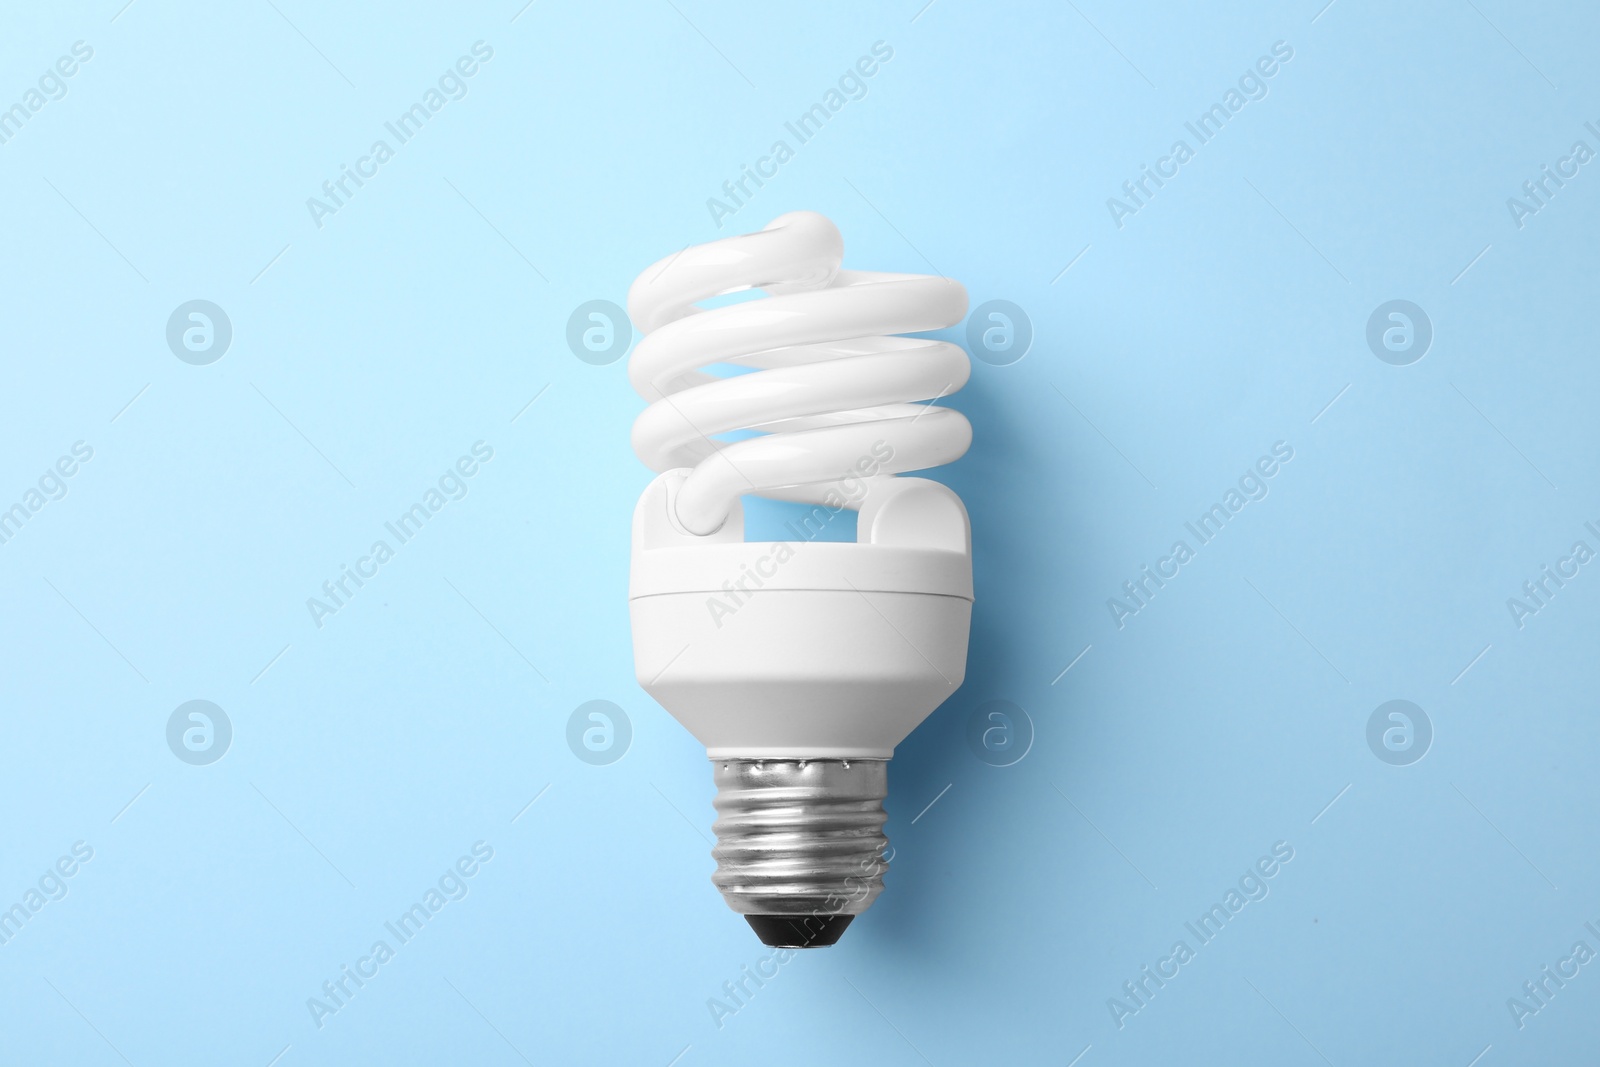 Photo of New modern lamp bulb on light blue background, top view